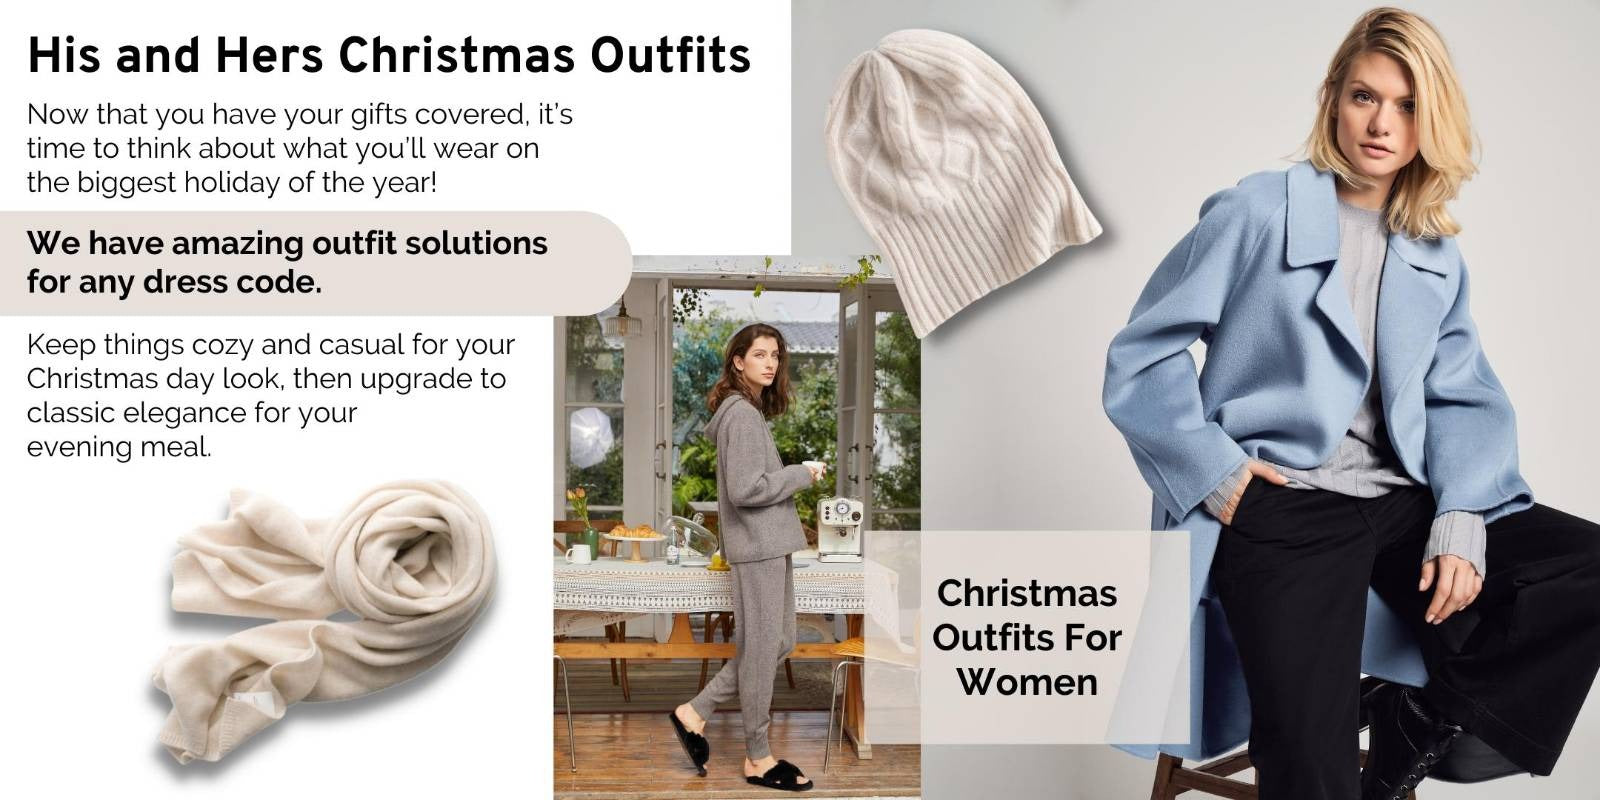 Christmas Outfits For Women